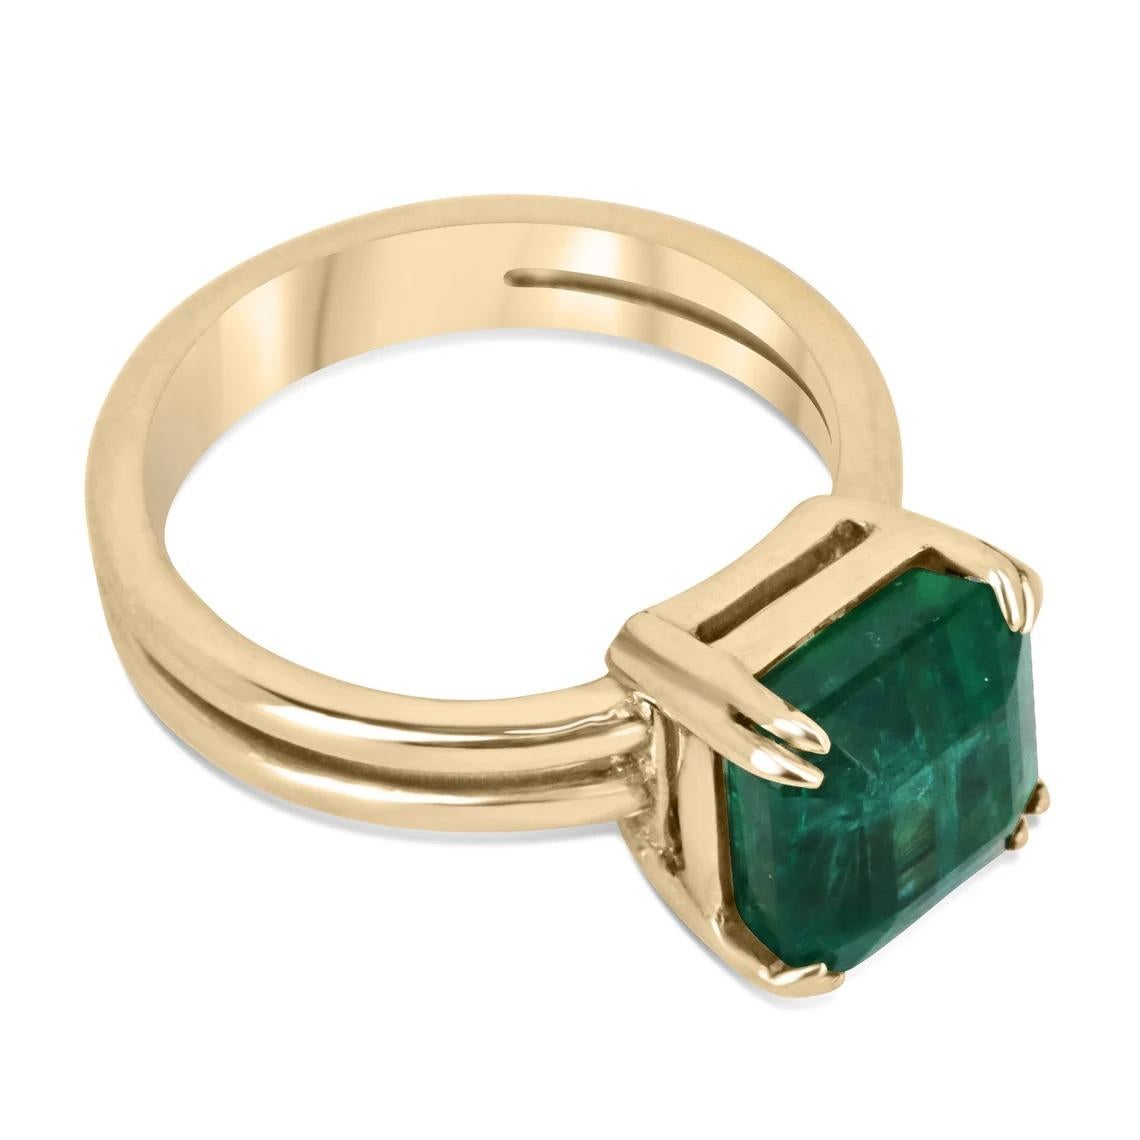 This exquisite solitaire ring features a natural 4.20-carat Asscher cut emerald, which boasts a vivid and rich green color, and amazing characteristics that add to its fine quality. The gemstone has perfect 9x9mm measurements, which gives it an